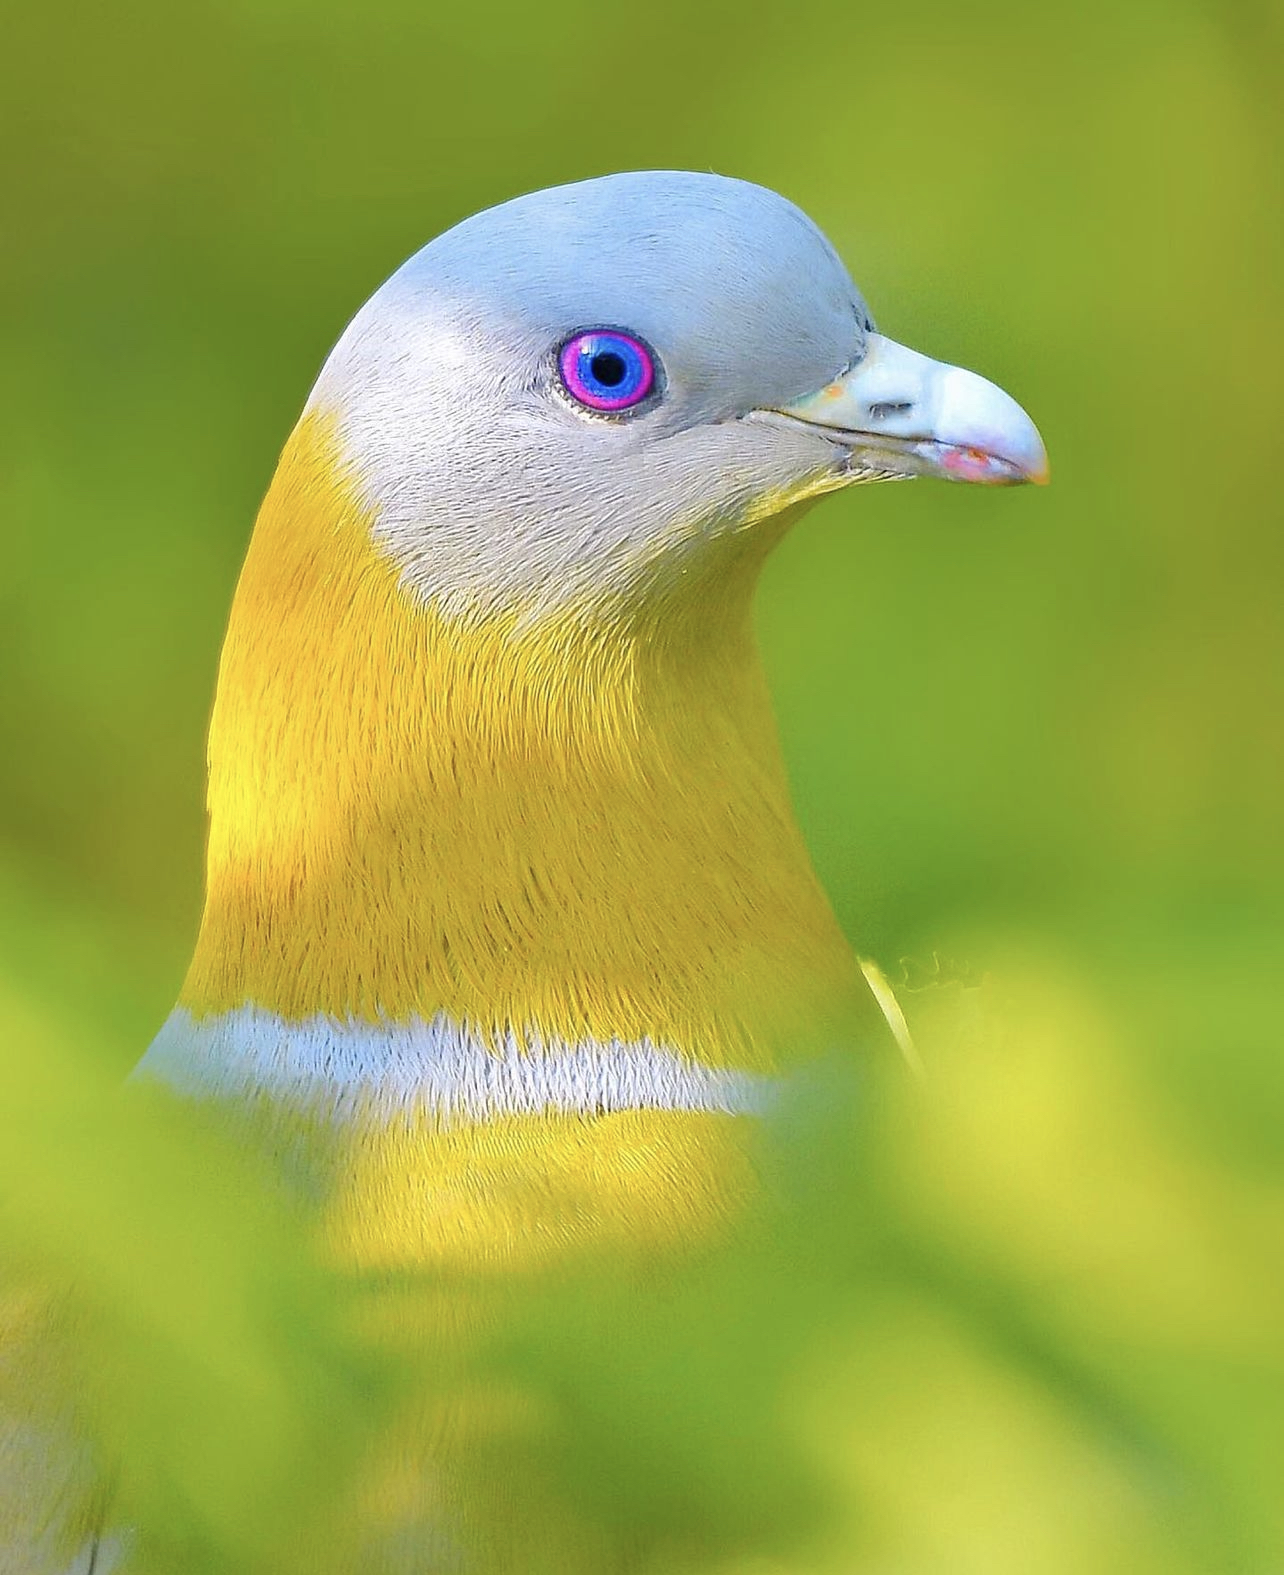 A blue and yellow pigeon pokes its head out of the leaves that surround it.